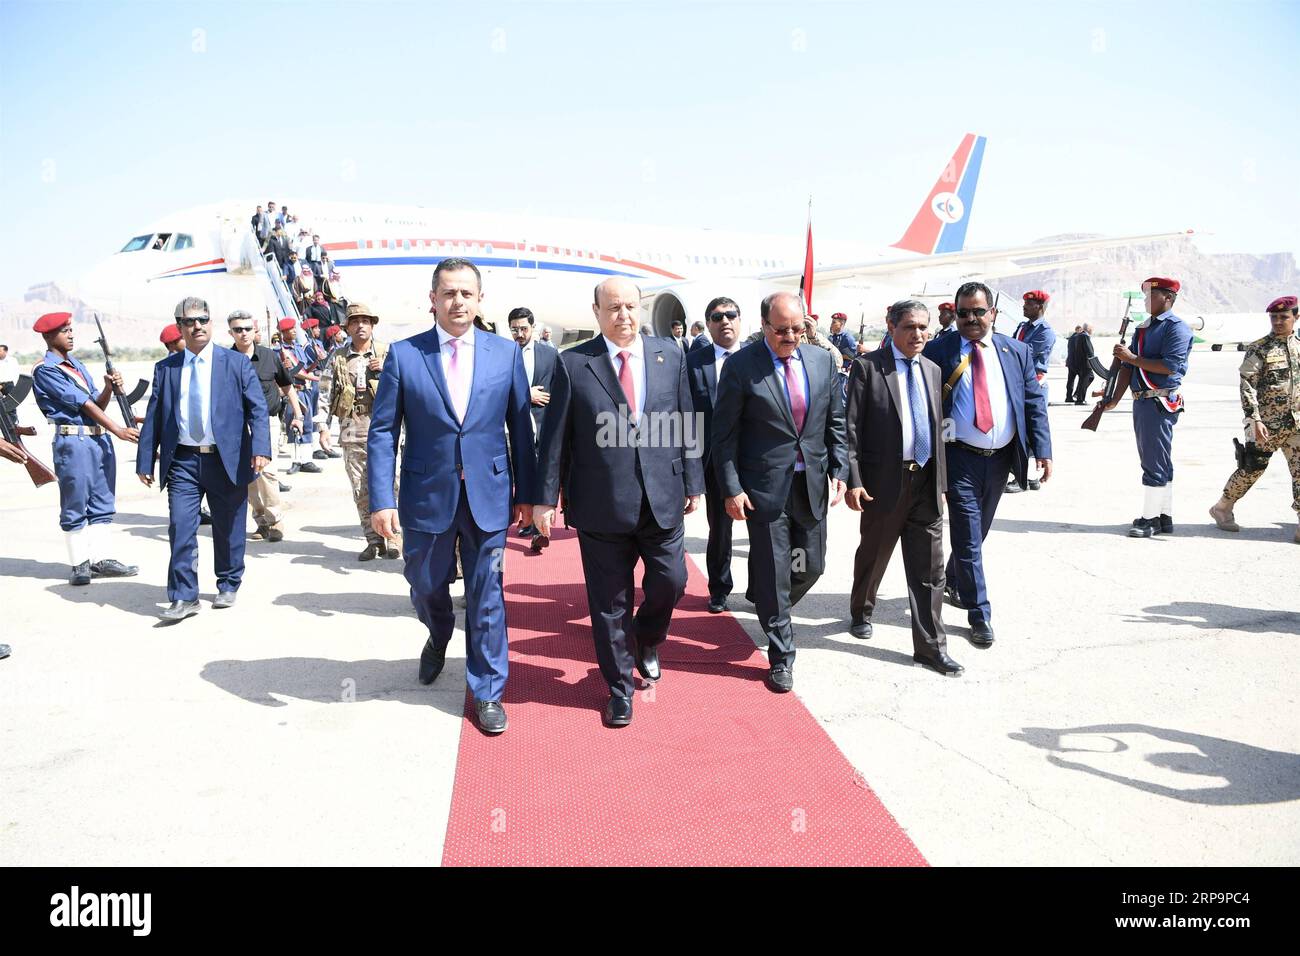 (190413) -- SEIYUN (YEMEN), April 13, 2019 -- Yemeni President Abdu-Rabbu Mansour Hadi (2nd L, front) walks with Prime Minister Maeen Abdulmalik (1st L, front) and other officials upon his arrival at the airport in Seiyun city of Hadramout province, Yemen, on April 13, 2019. Yemen s parliament convened on Saturday in the city of Seiyun, the second largest city in the southeastern province of Hadramout, for the first time since the outbreak of the devastating civil war in the impoverished Arab country in March 2015. ) YEMEN-SEIYUN-PARLIAMENT MEETING IsmailxRabidhy PUBLICATIONxNOTxINxCHN Stock Photo